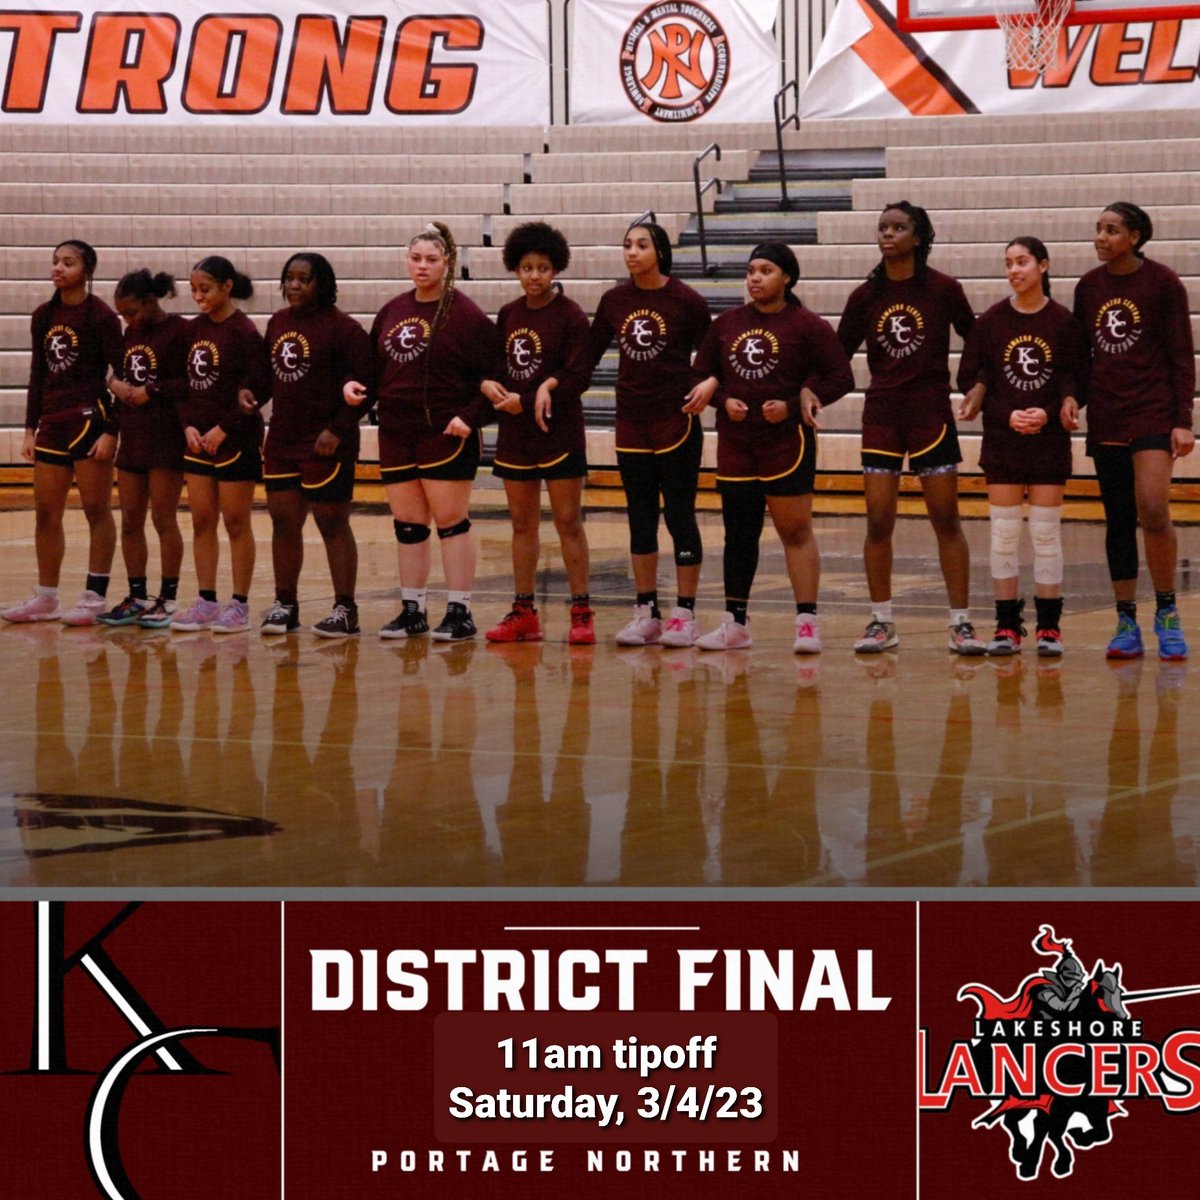 UPDATE: 🚨🚨 New Game Time, Sat, 3/4, 11am🚨🚨 ⛹🏽‍♀️🏀: @KCLadyGiants vs Lakeshore, District 13, Championship 🗓: Saturday, 3/4/23 *updated* 🕖: 11:00am *updated* 📍: Portage Northern's Igloo, maps.app.goo.gl/gZedTAAu788YRV… 🎟: gofan.co/app/events/916… #NoDaysOff #WeComing